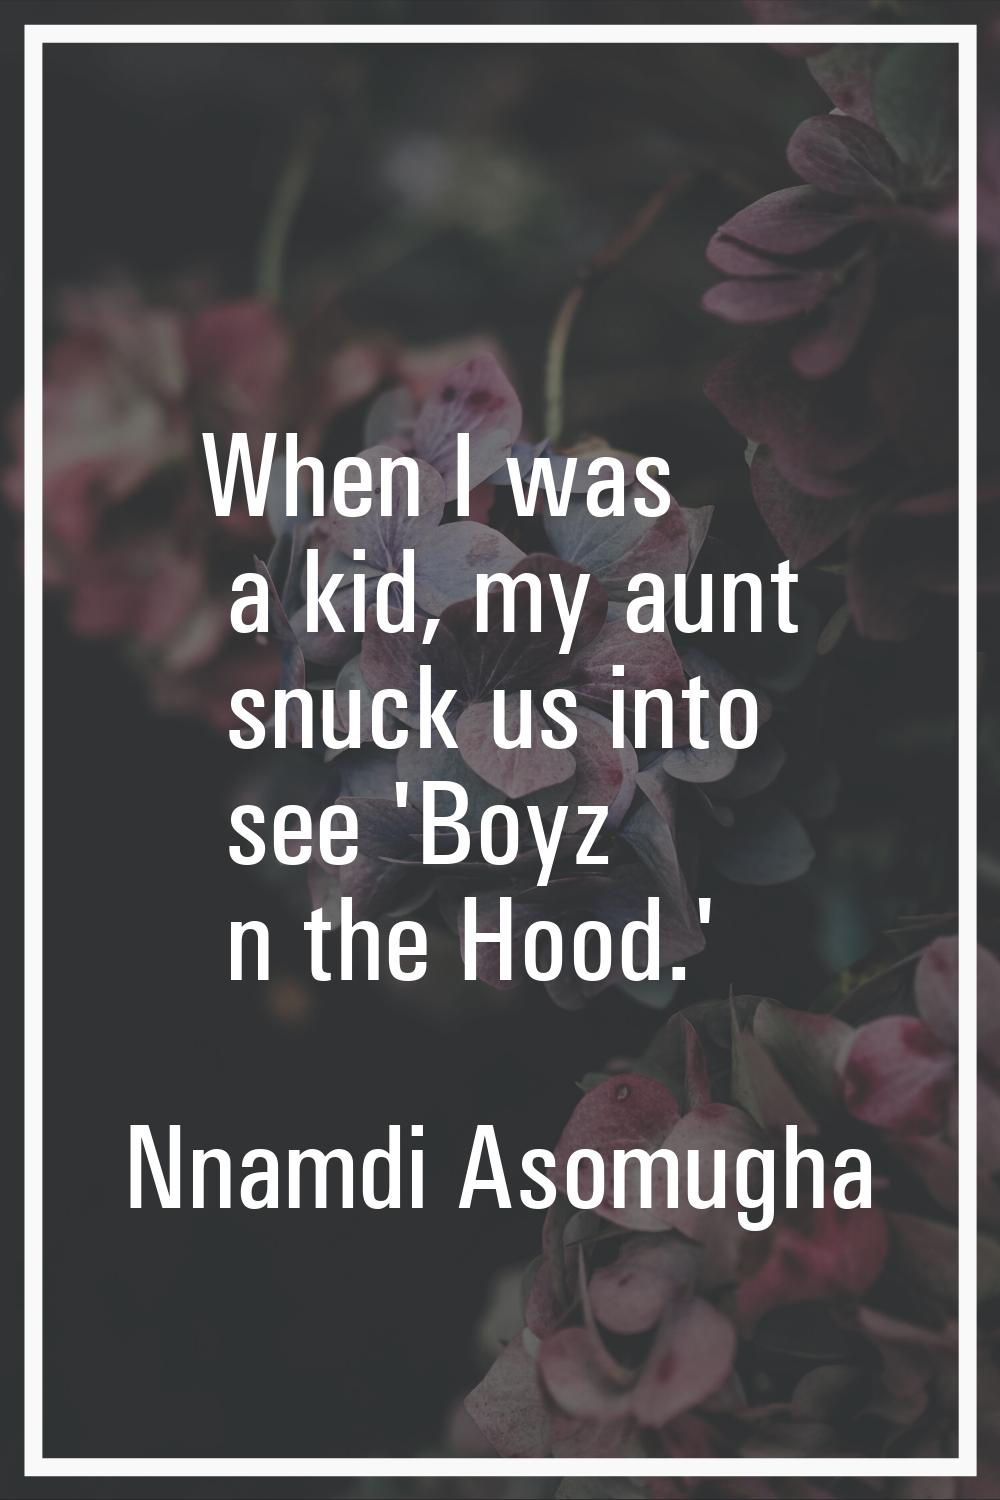 When I was a kid, my aunt snuck us into see 'Boyz n the Hood.'